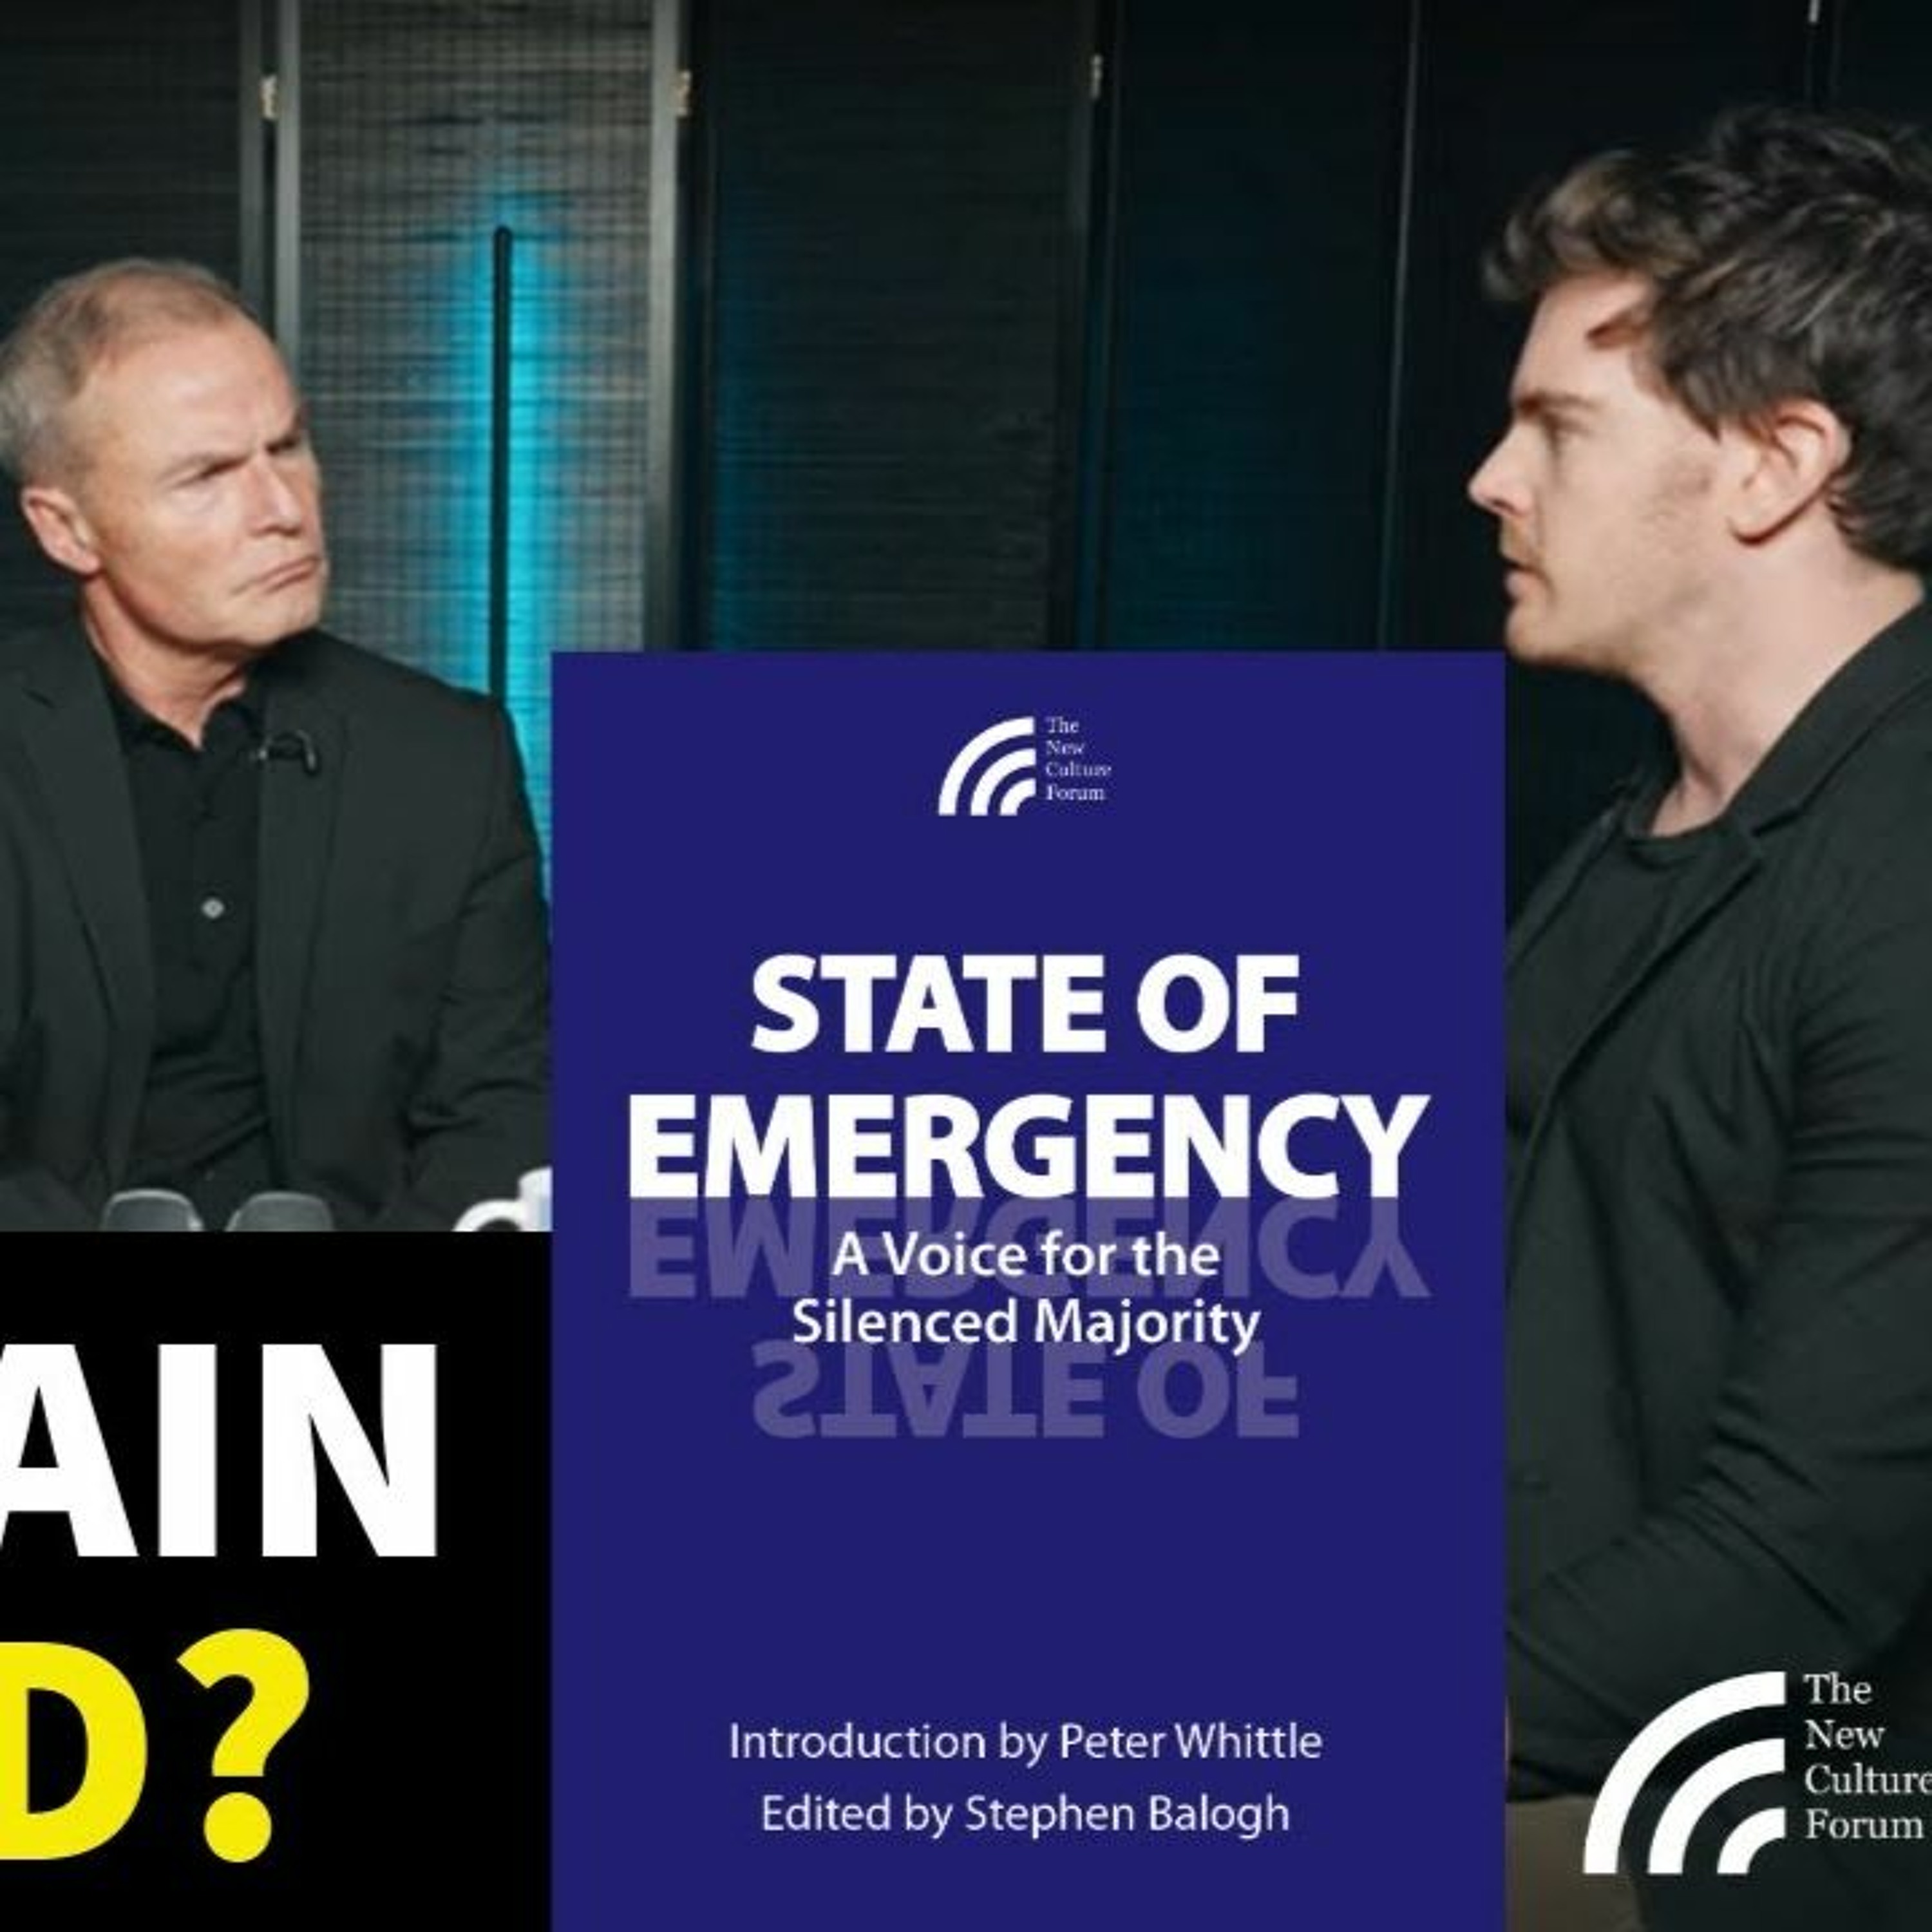 How to Save Britain from Cultural Obliteration. State of Emergency: The New Culture Forum's new book